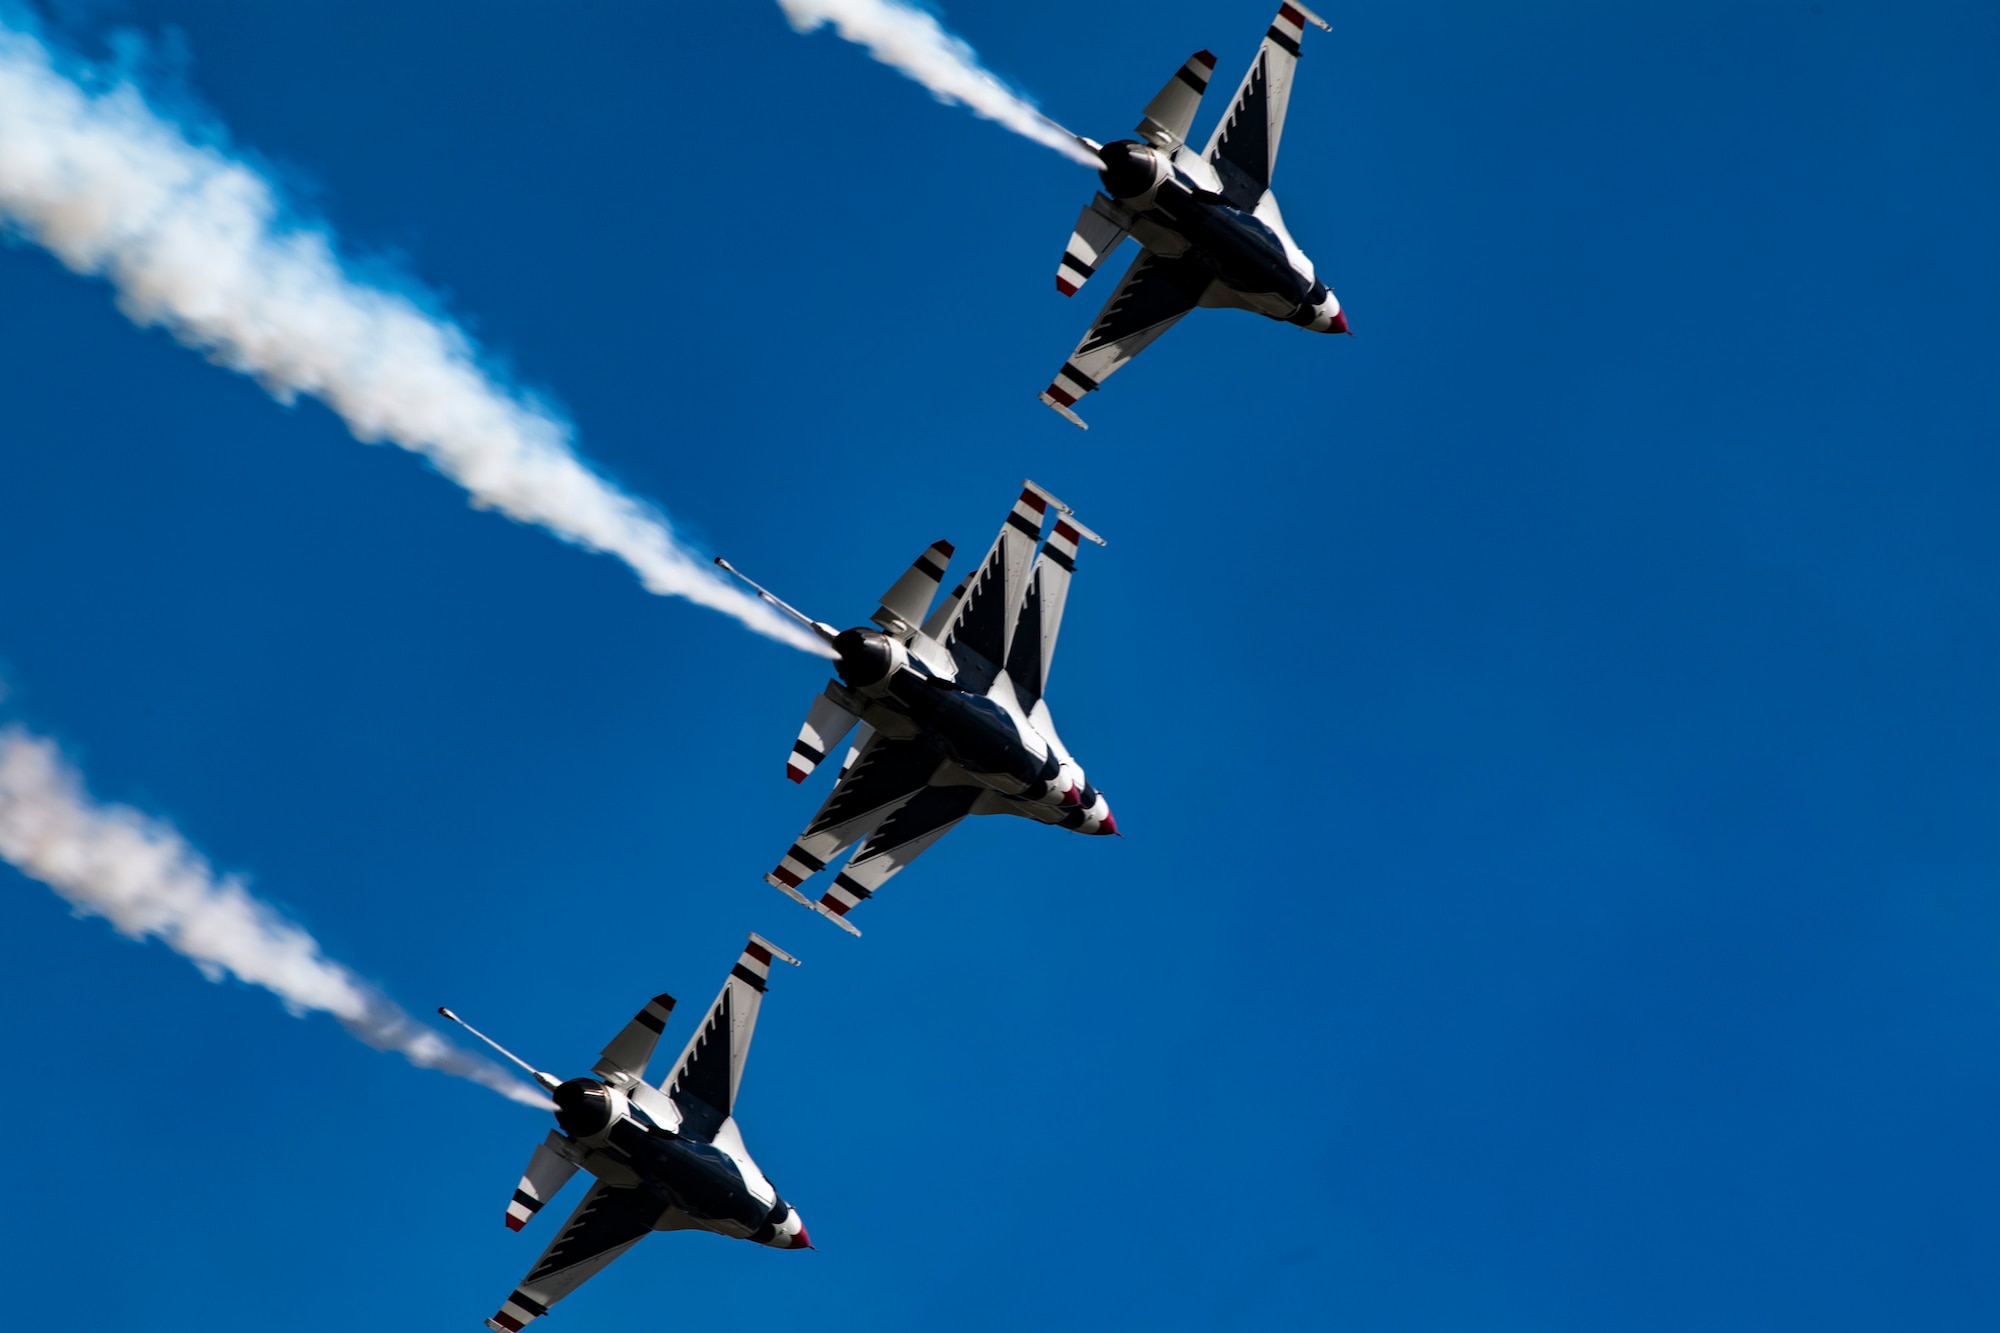 The U.S. Air Force Thunderbirds Flight Demonstration Team soars above Moody Air Force Base during the Thunder Over South Georgia Air Show, Oct. 28, 2017. The Thunderbirds performed twists, turns and rolls at high speeds demonstrating the prowess and capabilities of the F-16 Fighting Falcon. (U.S. Air Force photo by Senior Airman Daniel Snider)